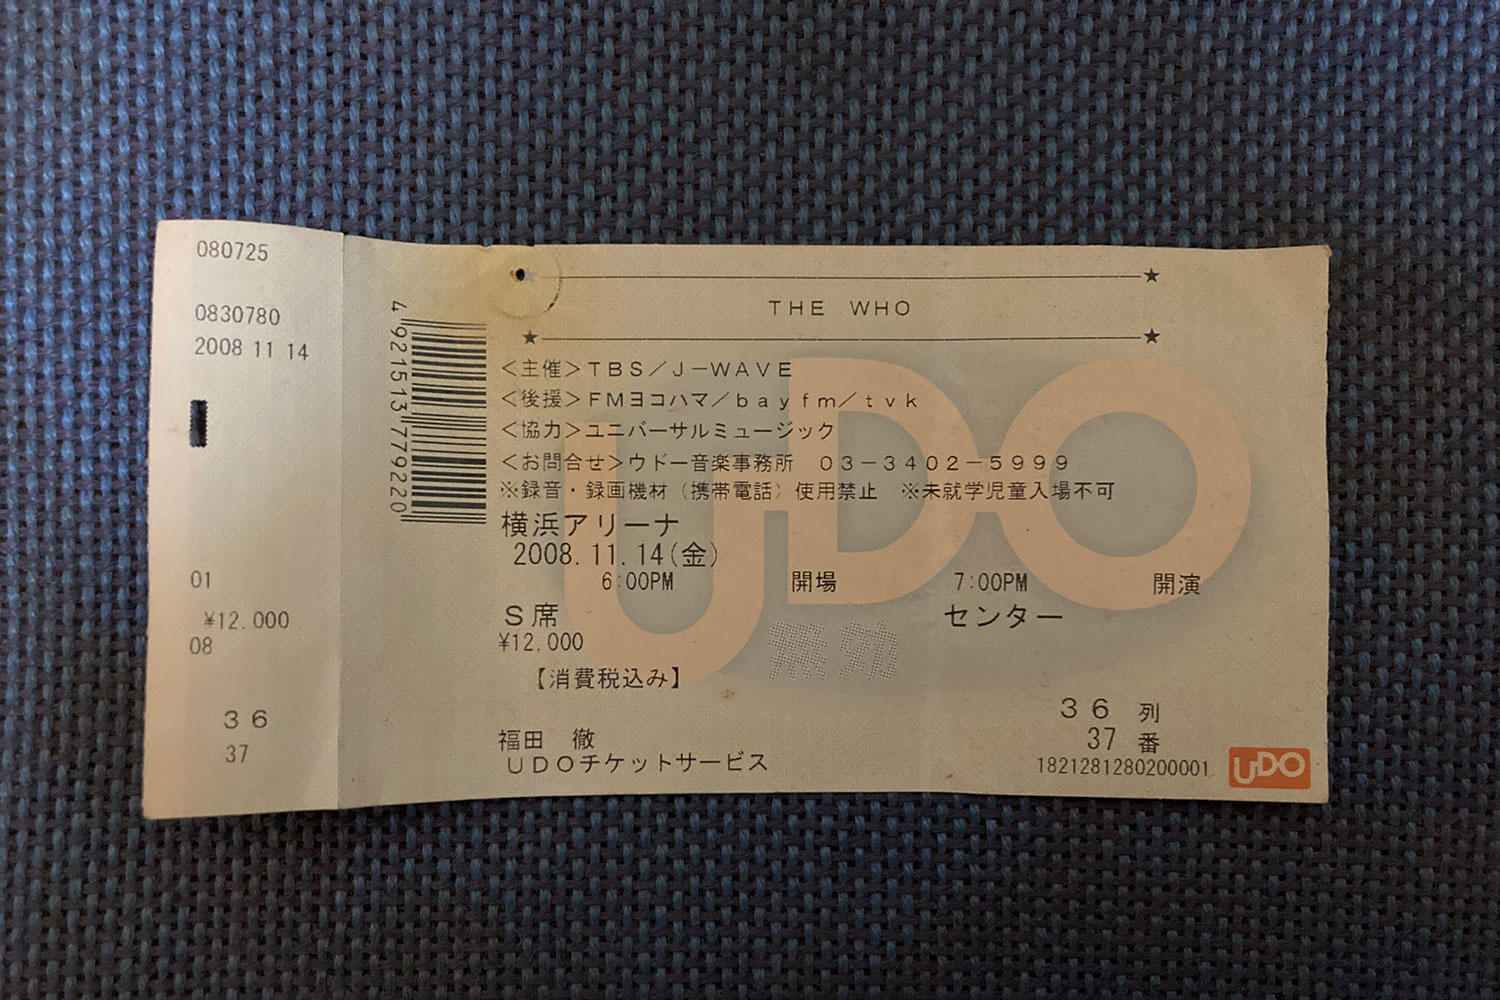 thewho_ticket_1500.jpg